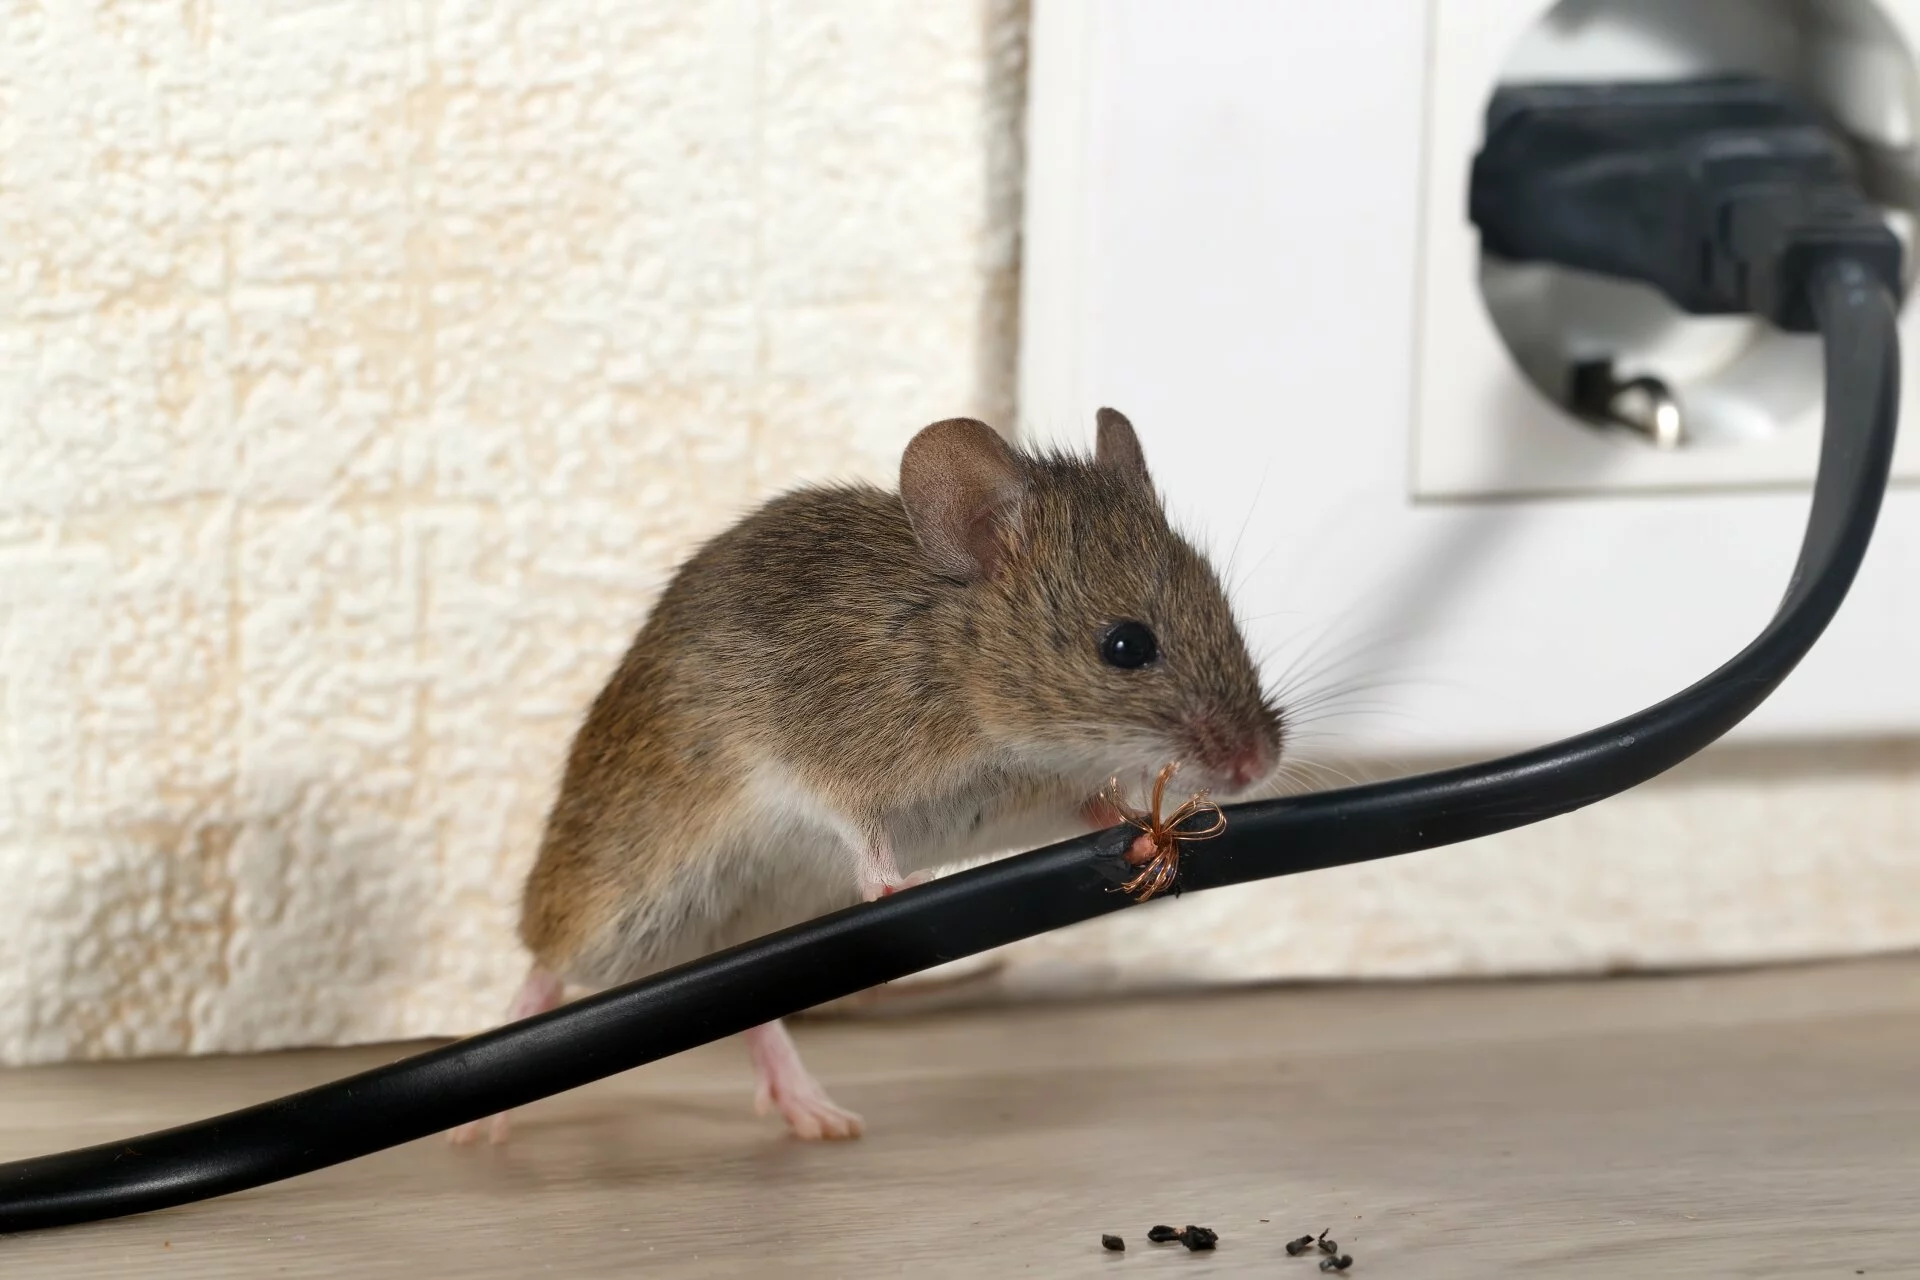 Mice Infestation, Pest Control in Clapton, E5. Call Now 020 8166 9746